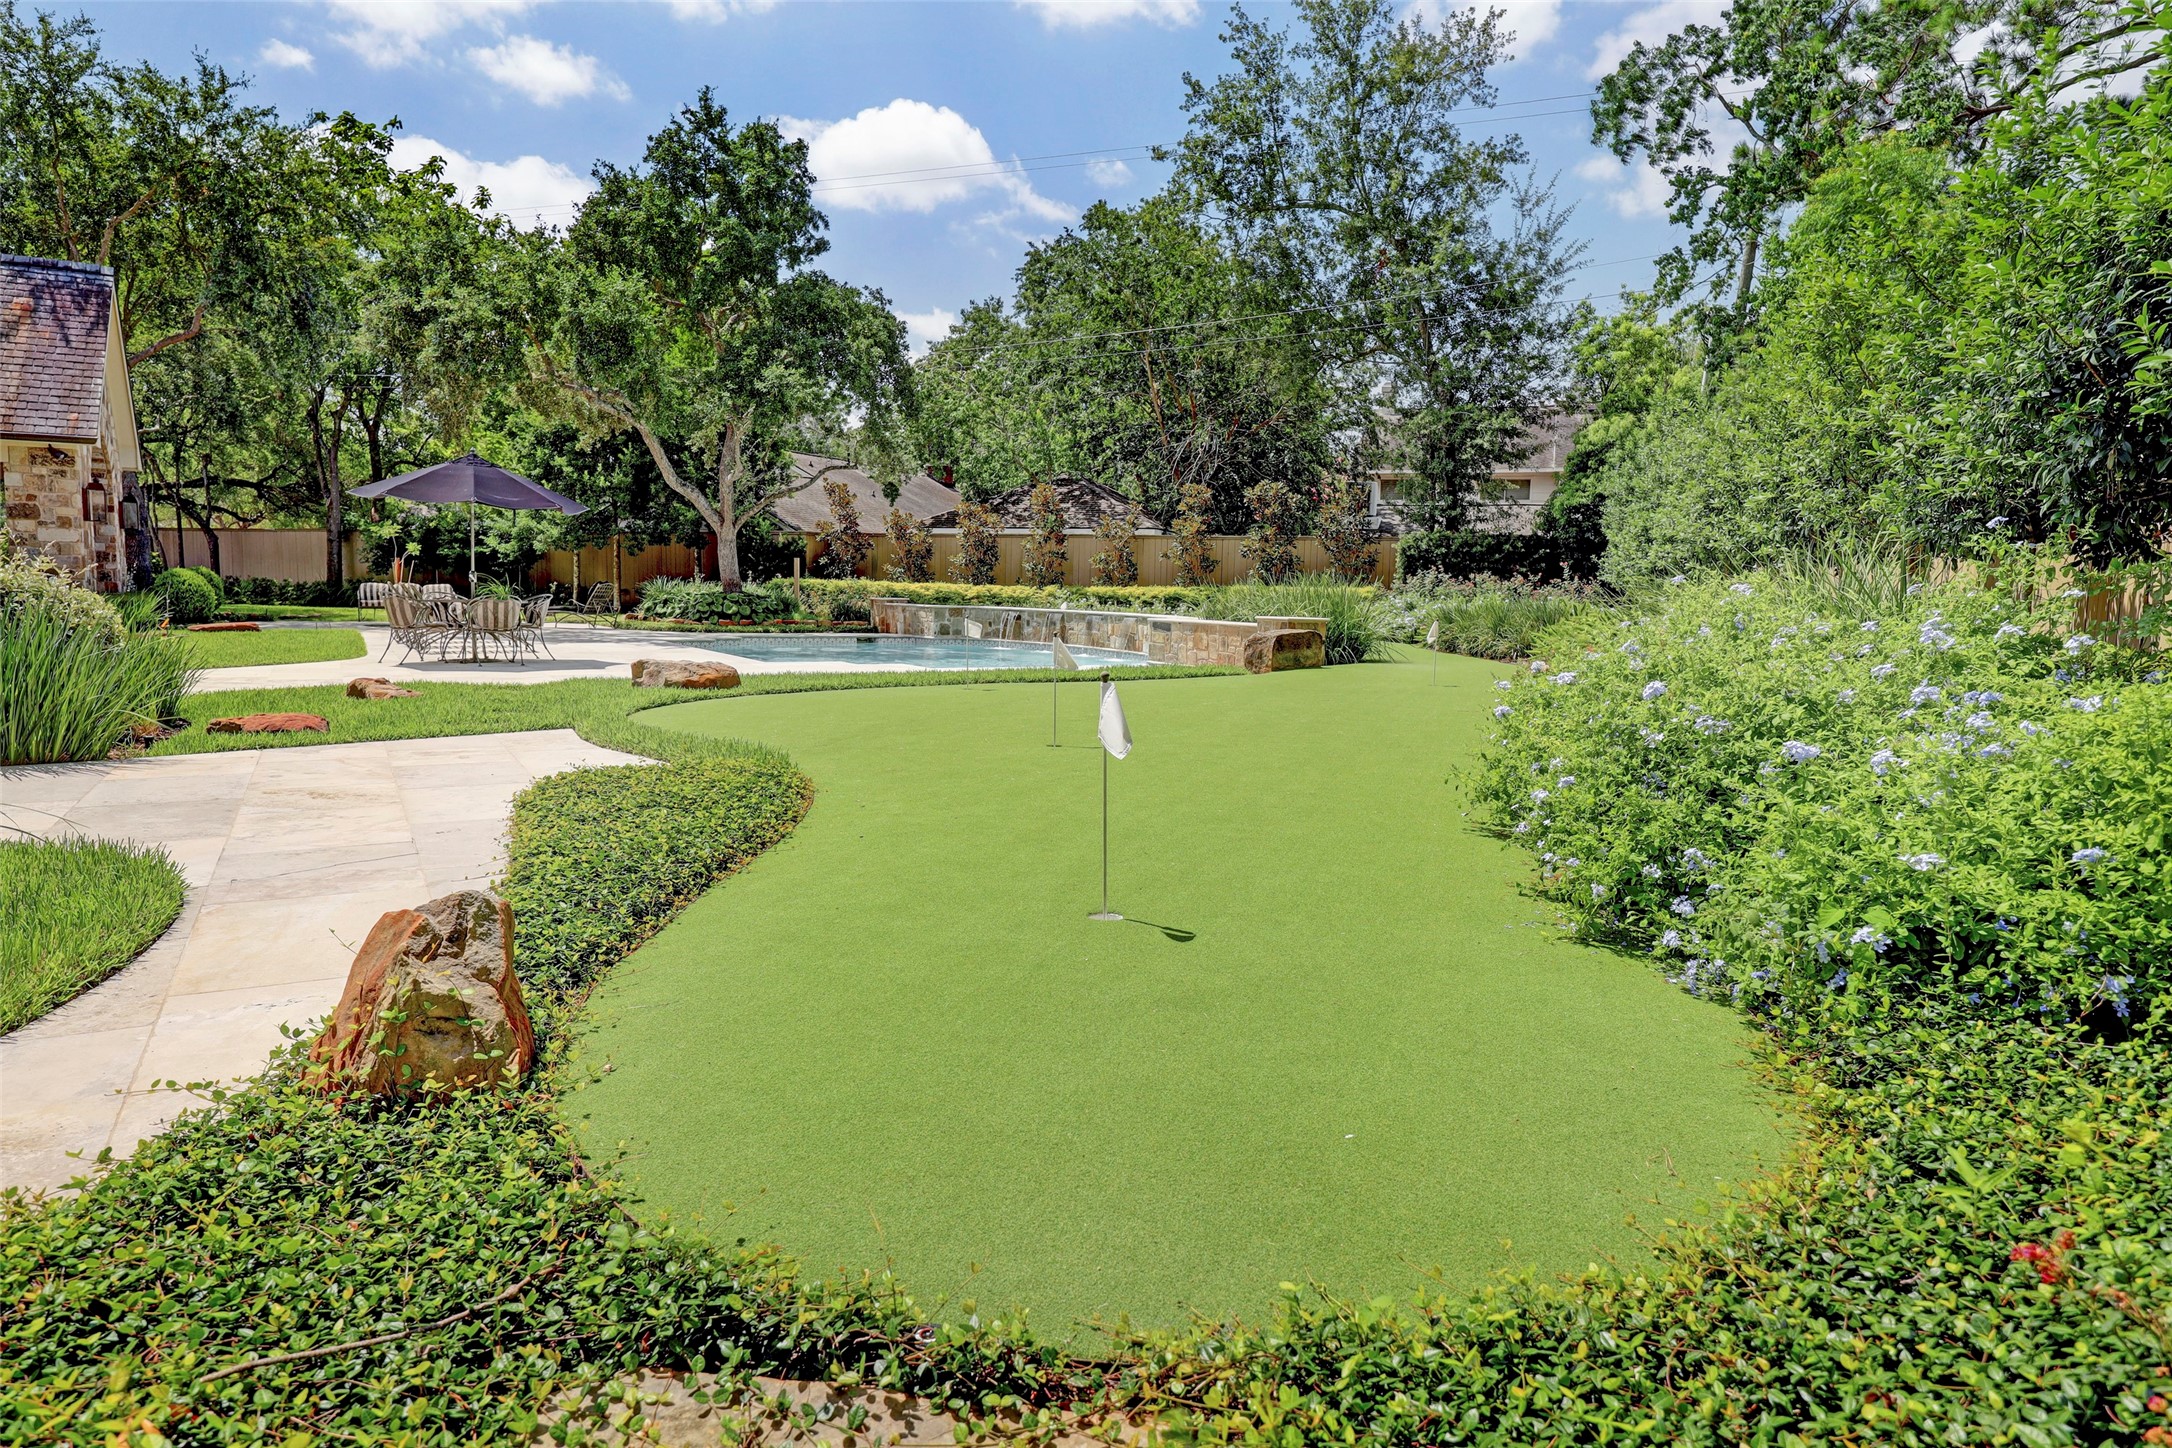 Large putting green that wraps around the back of the pool complete with sand trap.